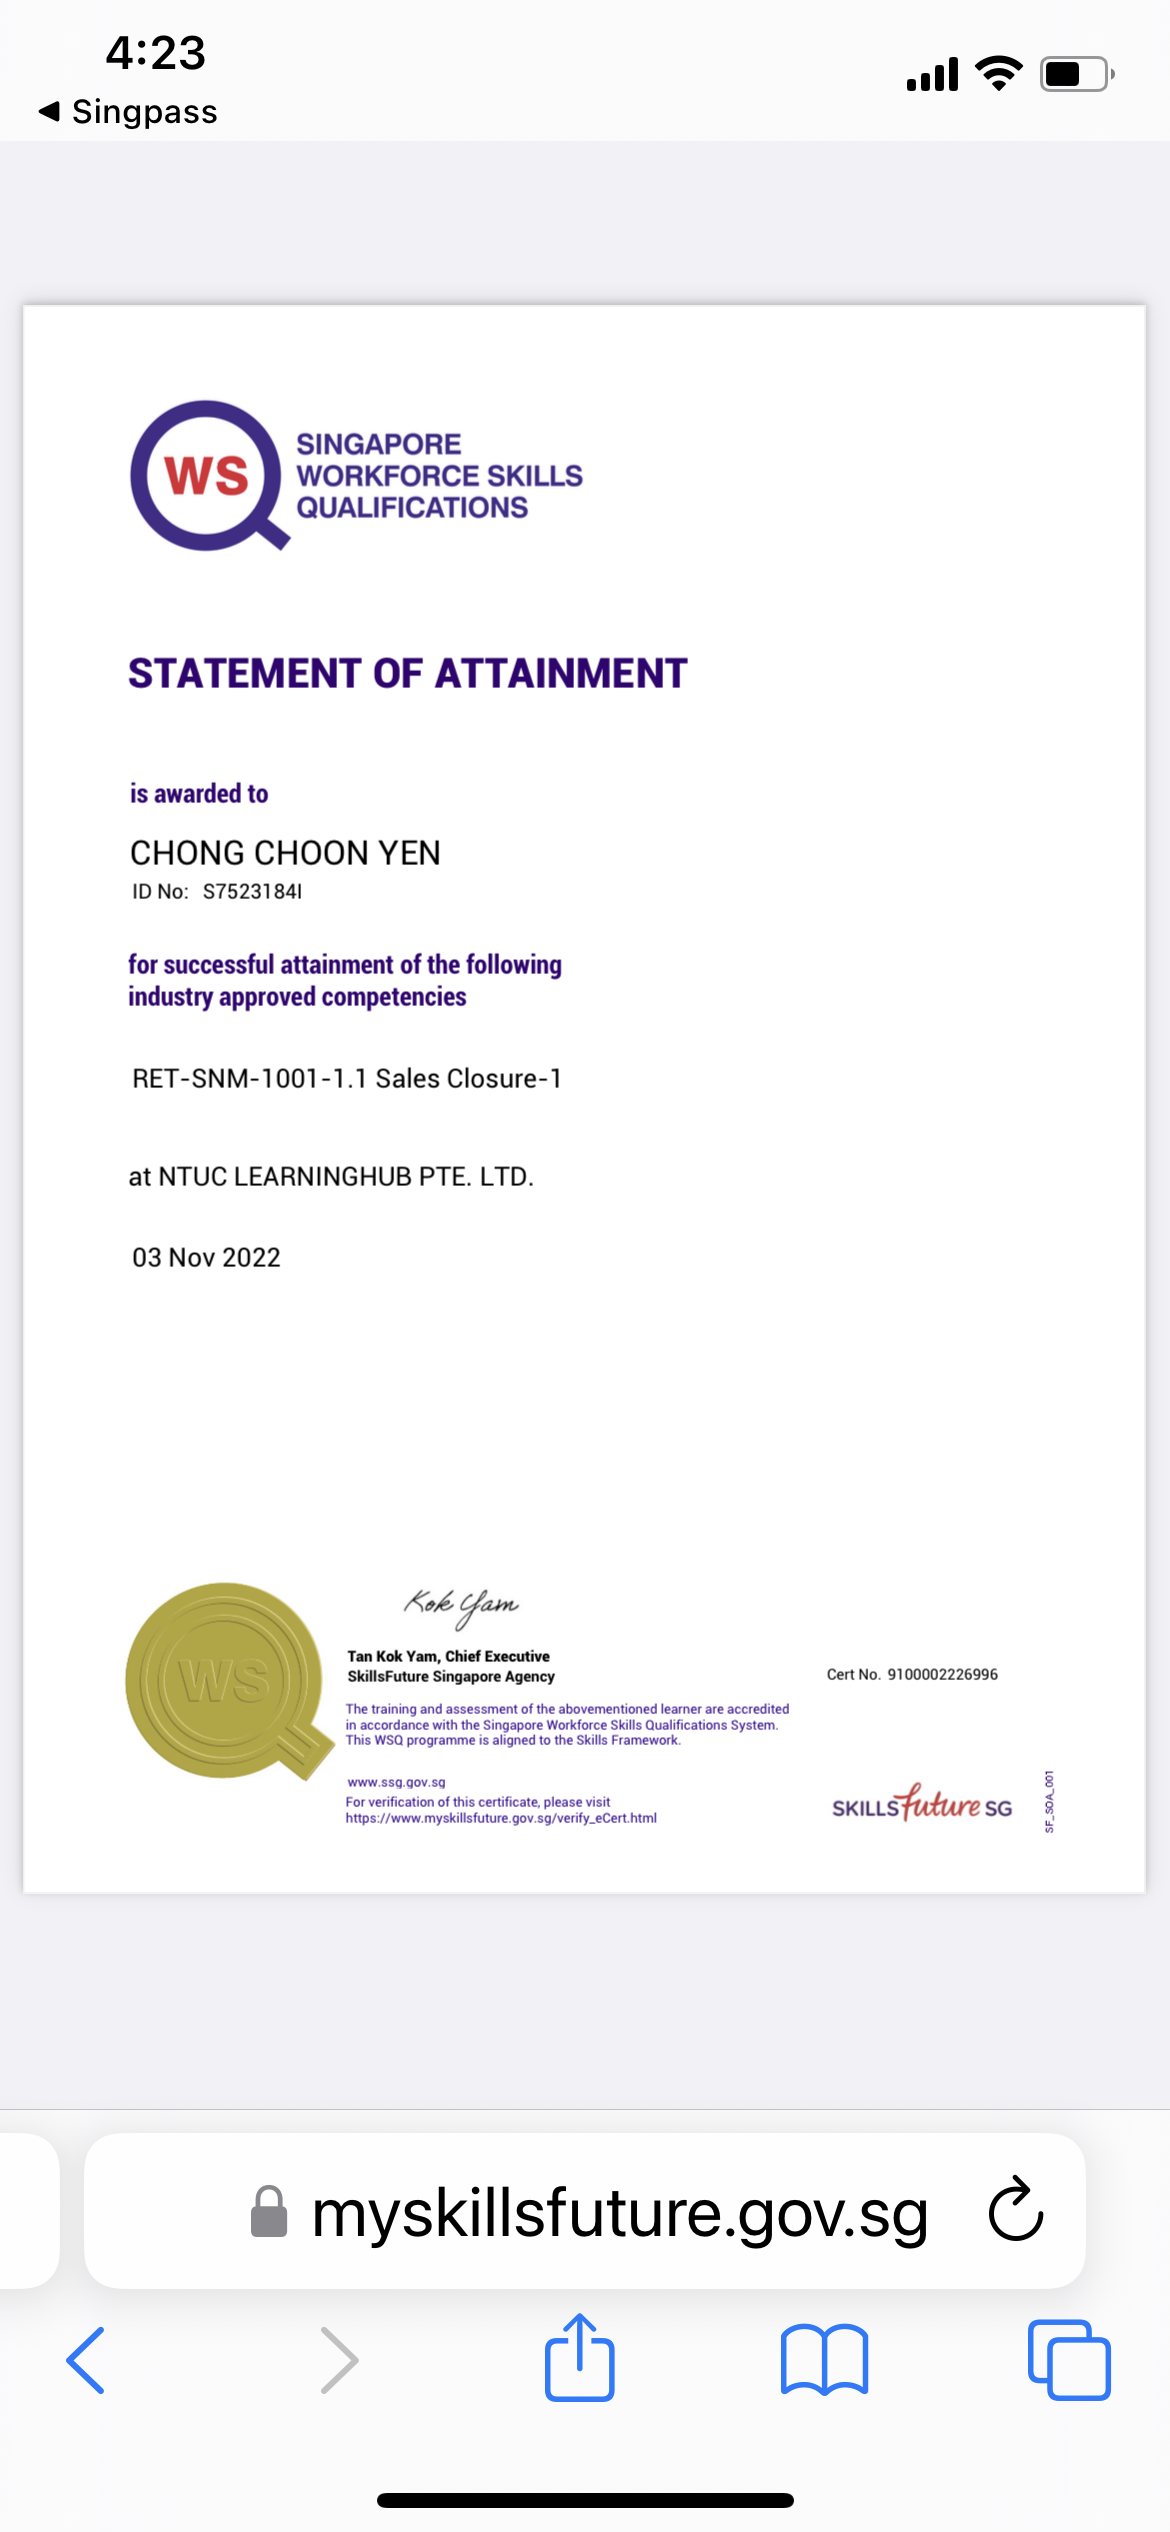 4:23 al S|)

4 Singpass

SINGAPORE
WORKFORCE SKILLS
QUALIFICATIONS

STATEMENT OF ATTAINMENT

is awarded to

CHONG CHOON YEN

ID No: $75231841

for successful attainment of the following
industry approved competencies

RET-SNM-1001-1.1 Sales Closure-1

at NTUC LEARNINGHUB PTE. LTD.

03 Nov 2022

Kok Sam

Tan Kok Yam, Chéef Executive
SlllsFuture Singapore Agency Cert No. 9100002226996

The trang and assessment of the abovementioned learer are accredited
n accordance with the Sgapcre Workforce Skills Quakficabons System
This WSQ programme is signed 1o the Skill Framework

 

www 333 90v 50 8

For verification of this certificate. please visit b-1
i
Pi1p3./ www myskillsfuture gov 33/veny_eCert him SKILLS s¢ 1

& myskillsfuture.gov.sg C
< Mh Mm